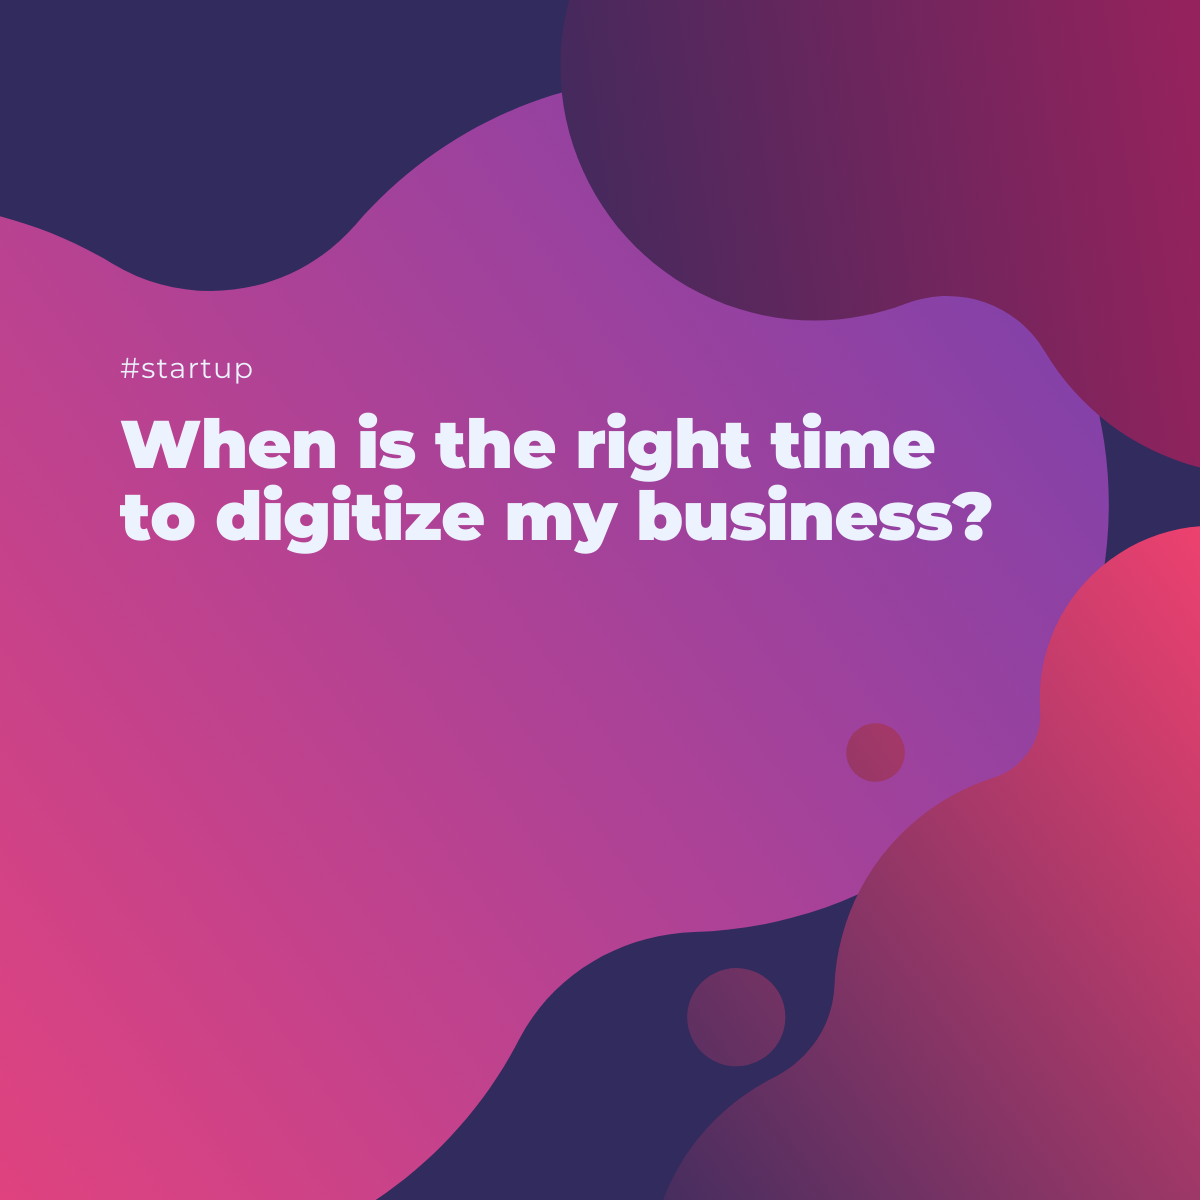 When is the right time to digitize my business?